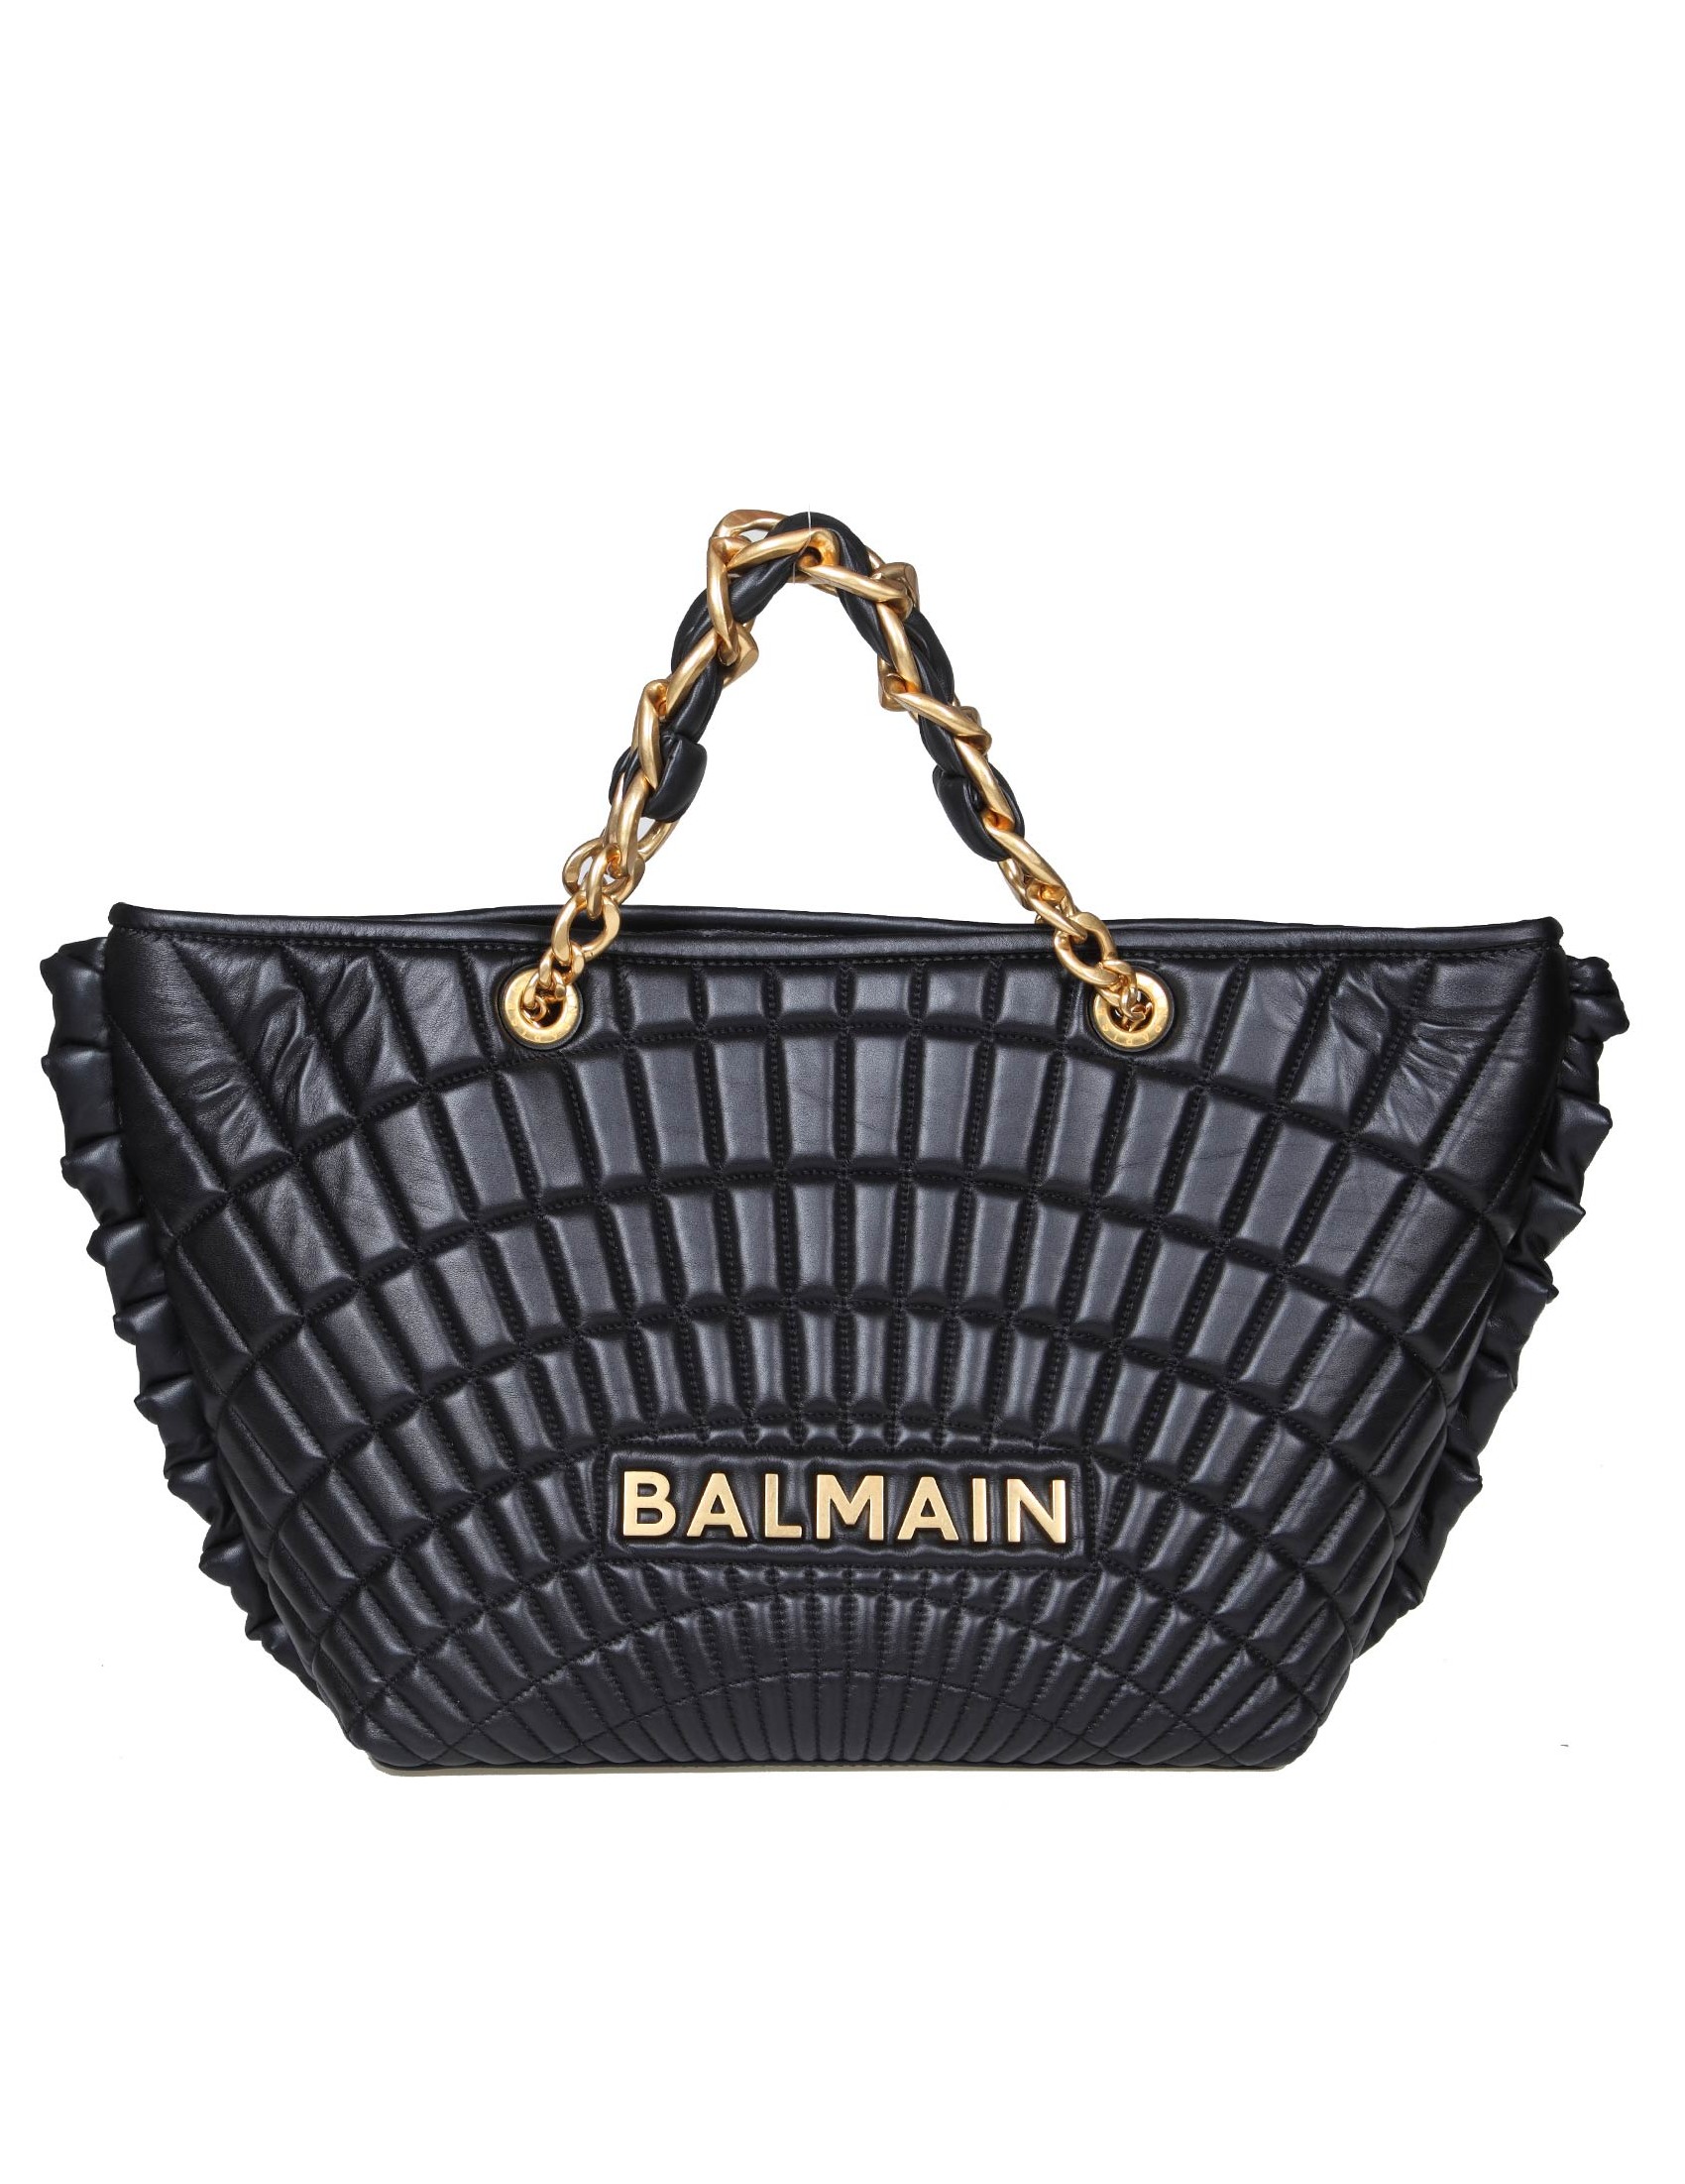 BALMAIN BORFSA SHPPING 1945 SOFT IN QUILTED LEATHER